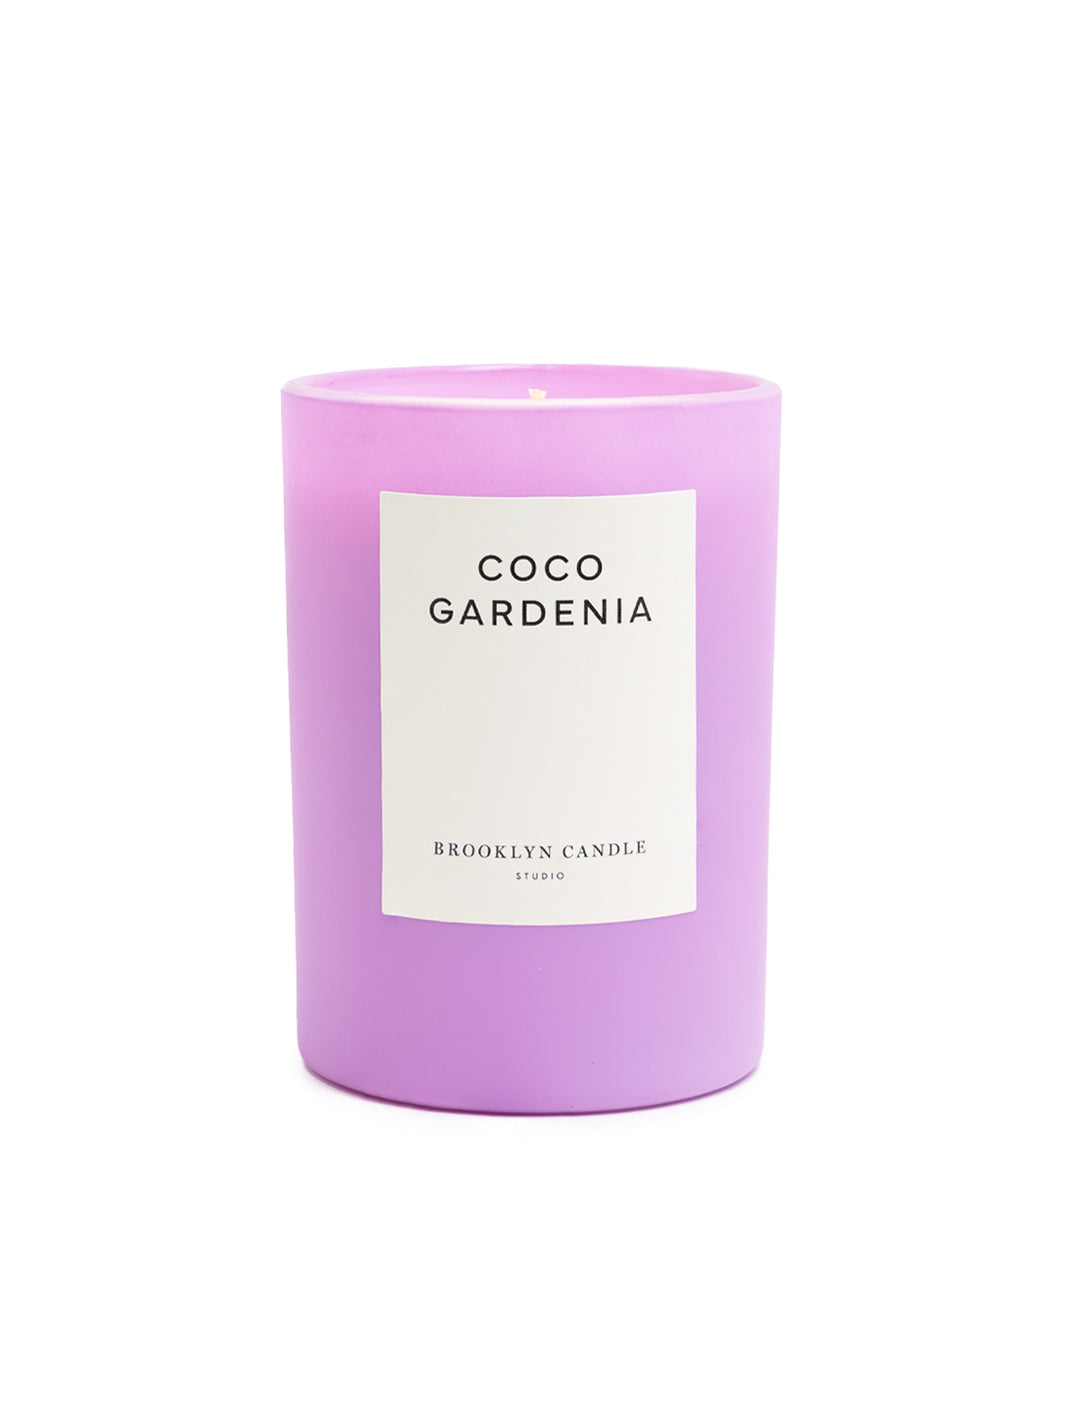 Front view of Brooklyn Candle Studio's coco gardenia candle.